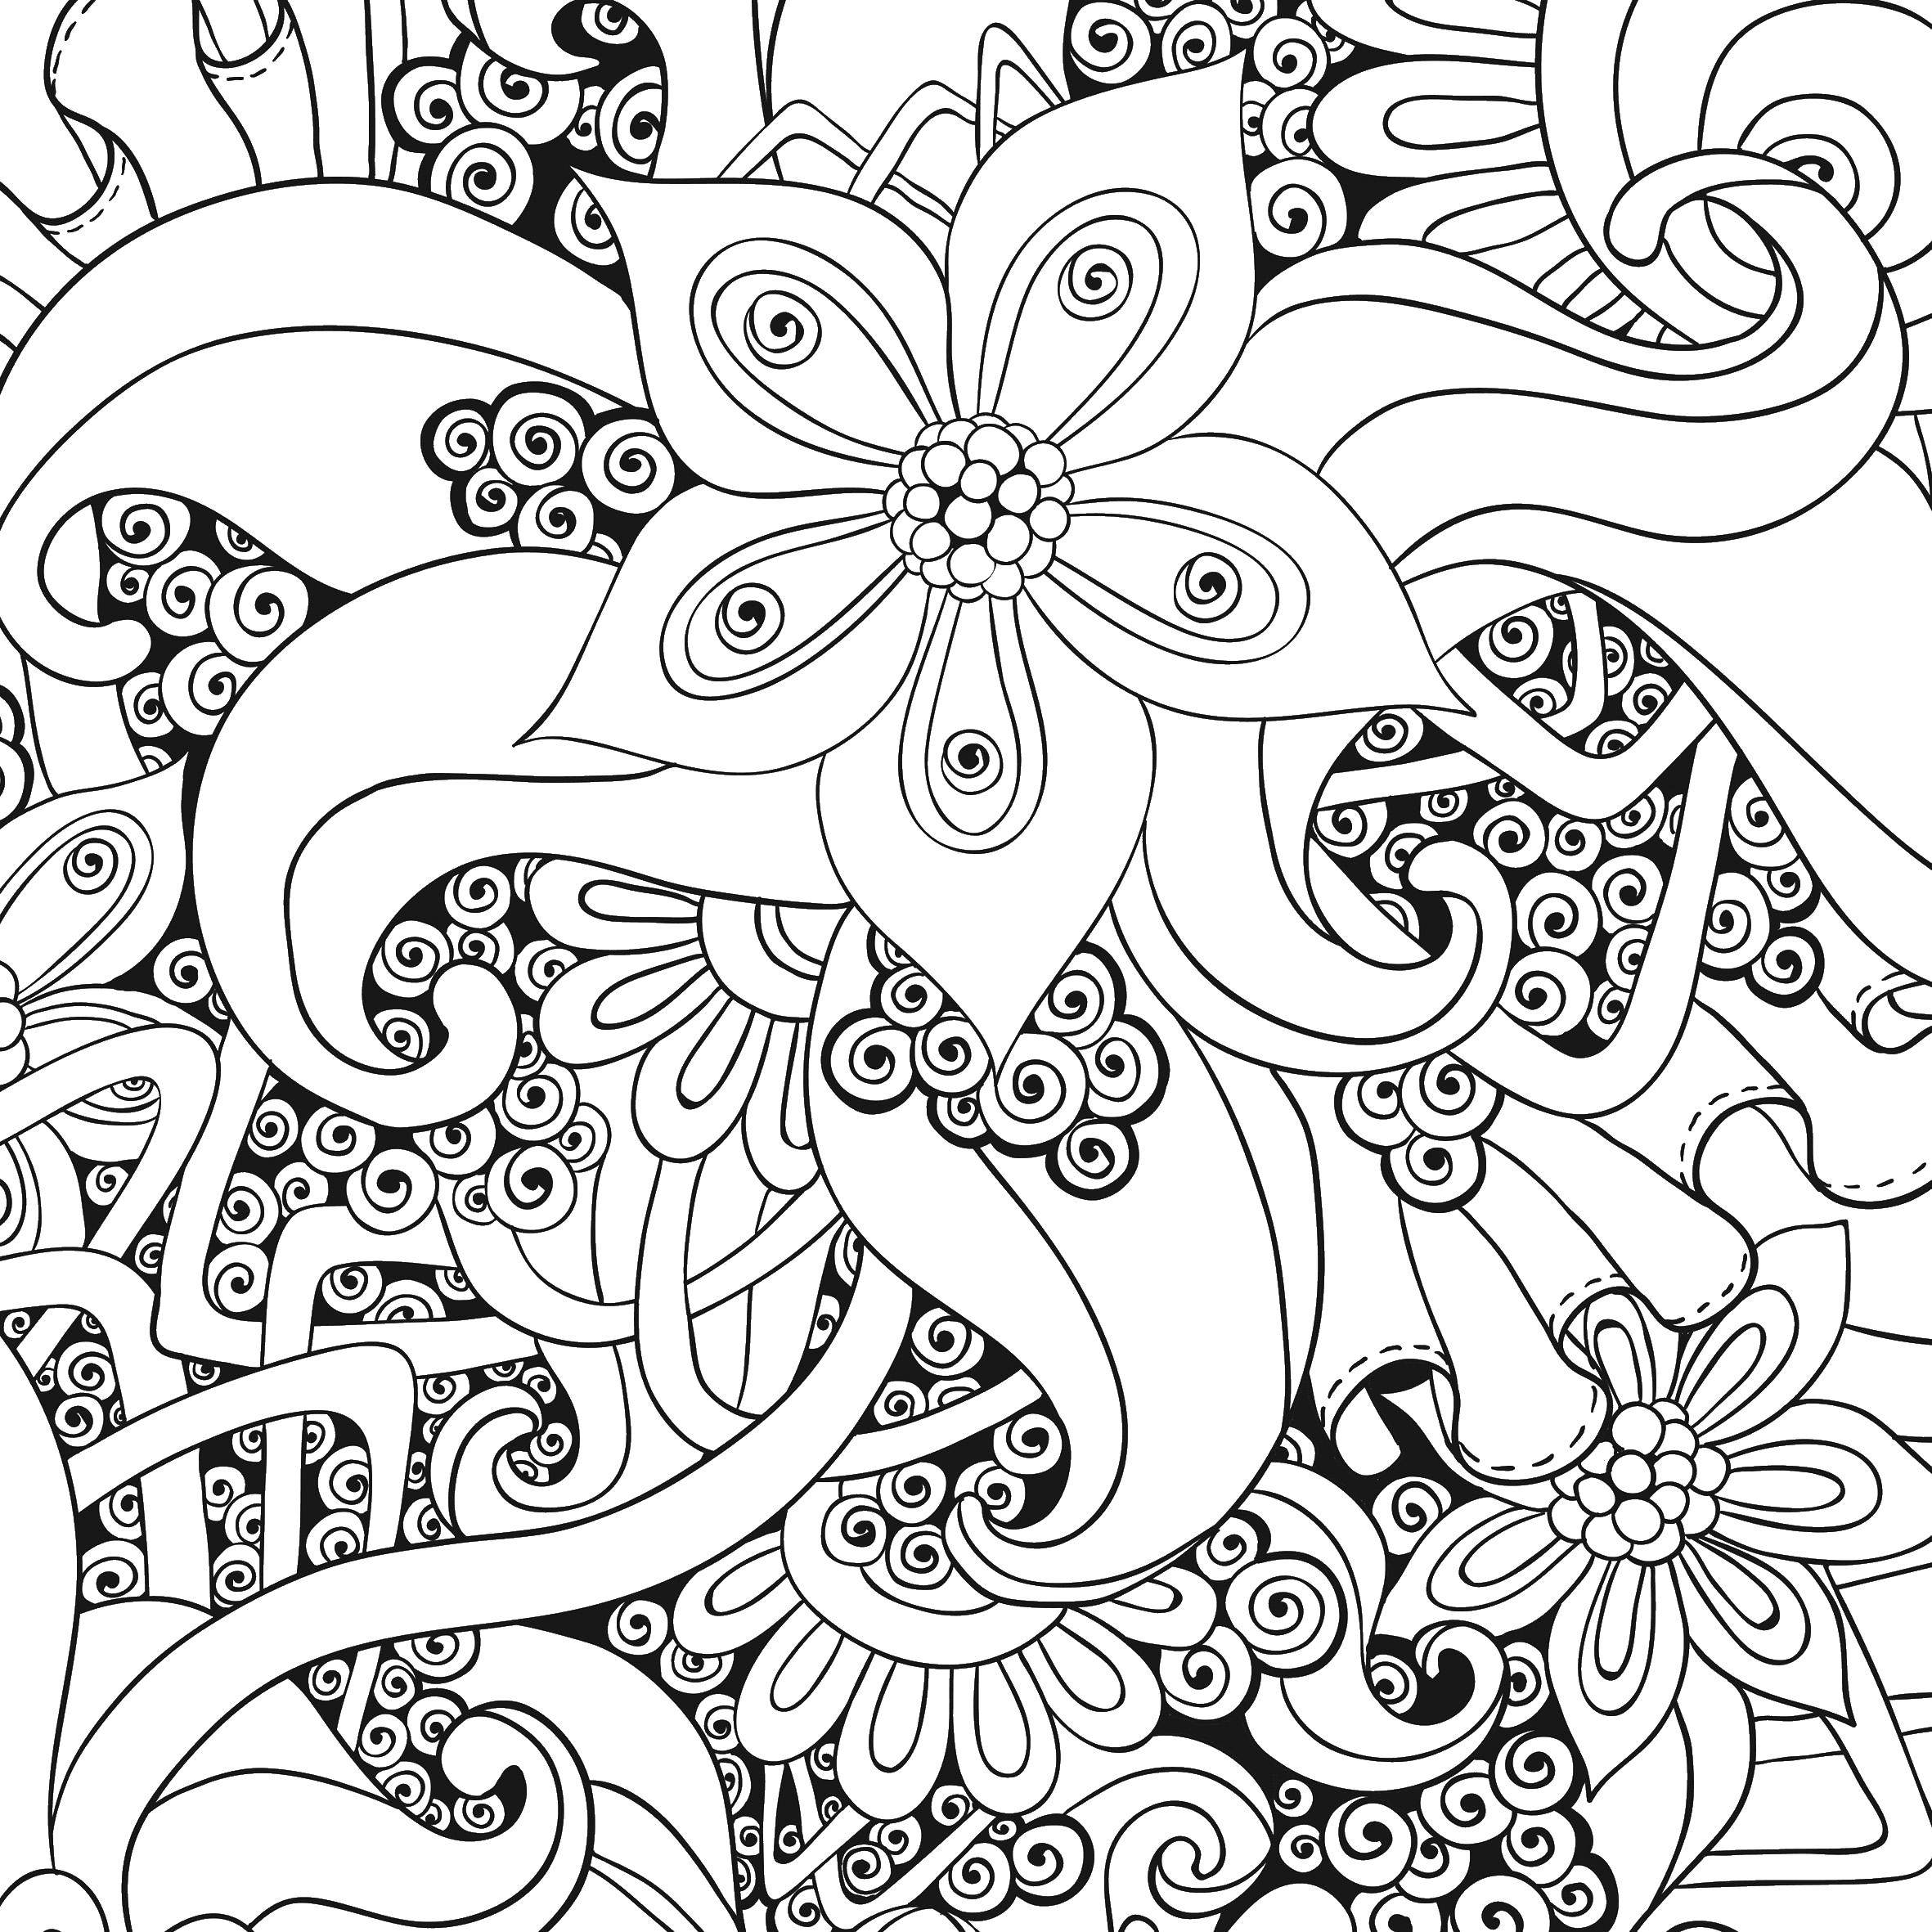 Coloring Flowers. Category coloring antistress. Tags:  flowers.